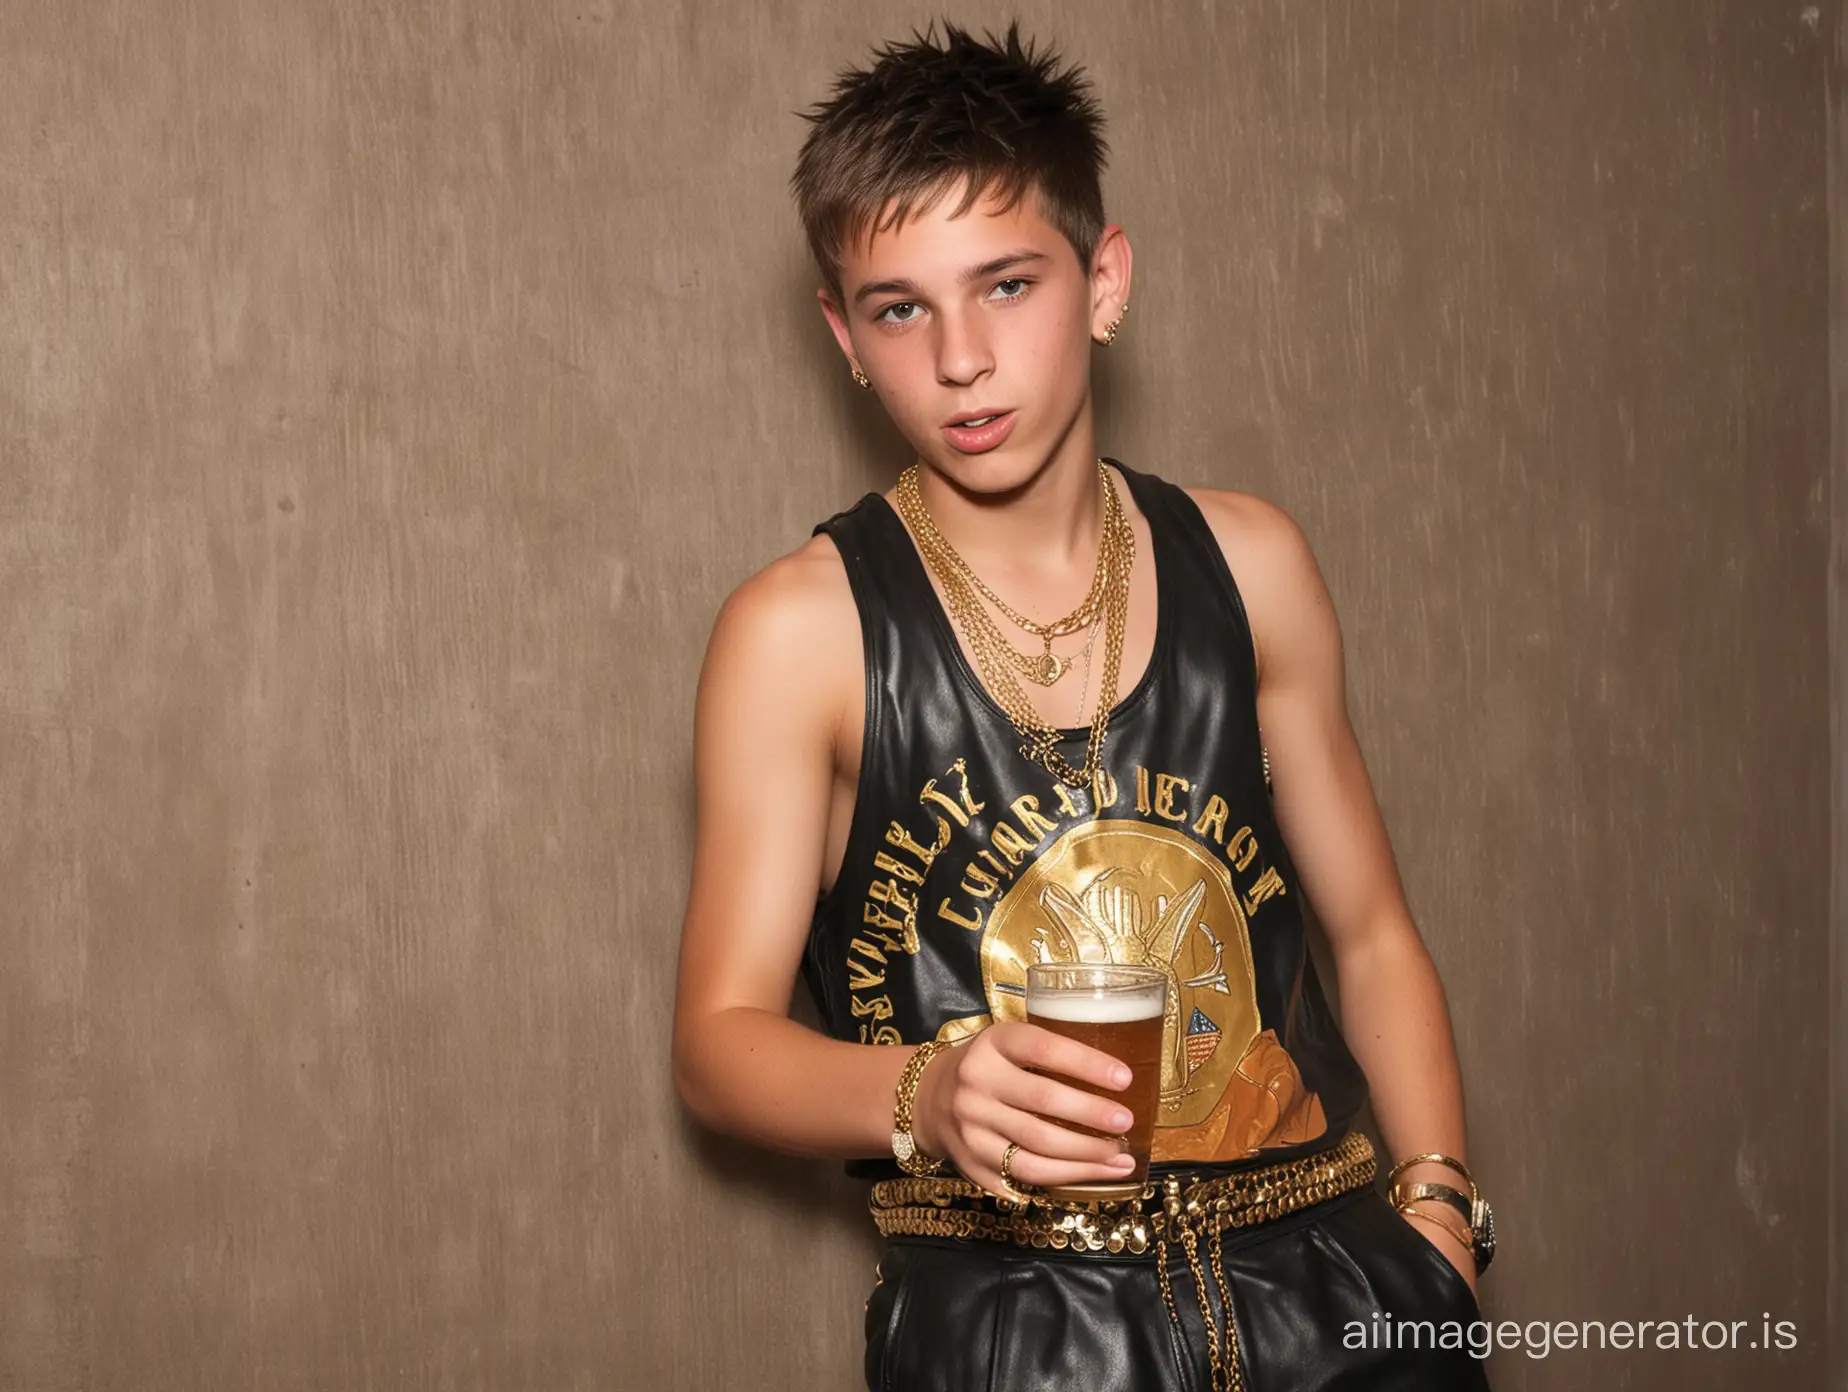 15 year old boy chav lad with leather  shorts, and tank top and loads of heavy gold jewellery and every part of his body drinking beer